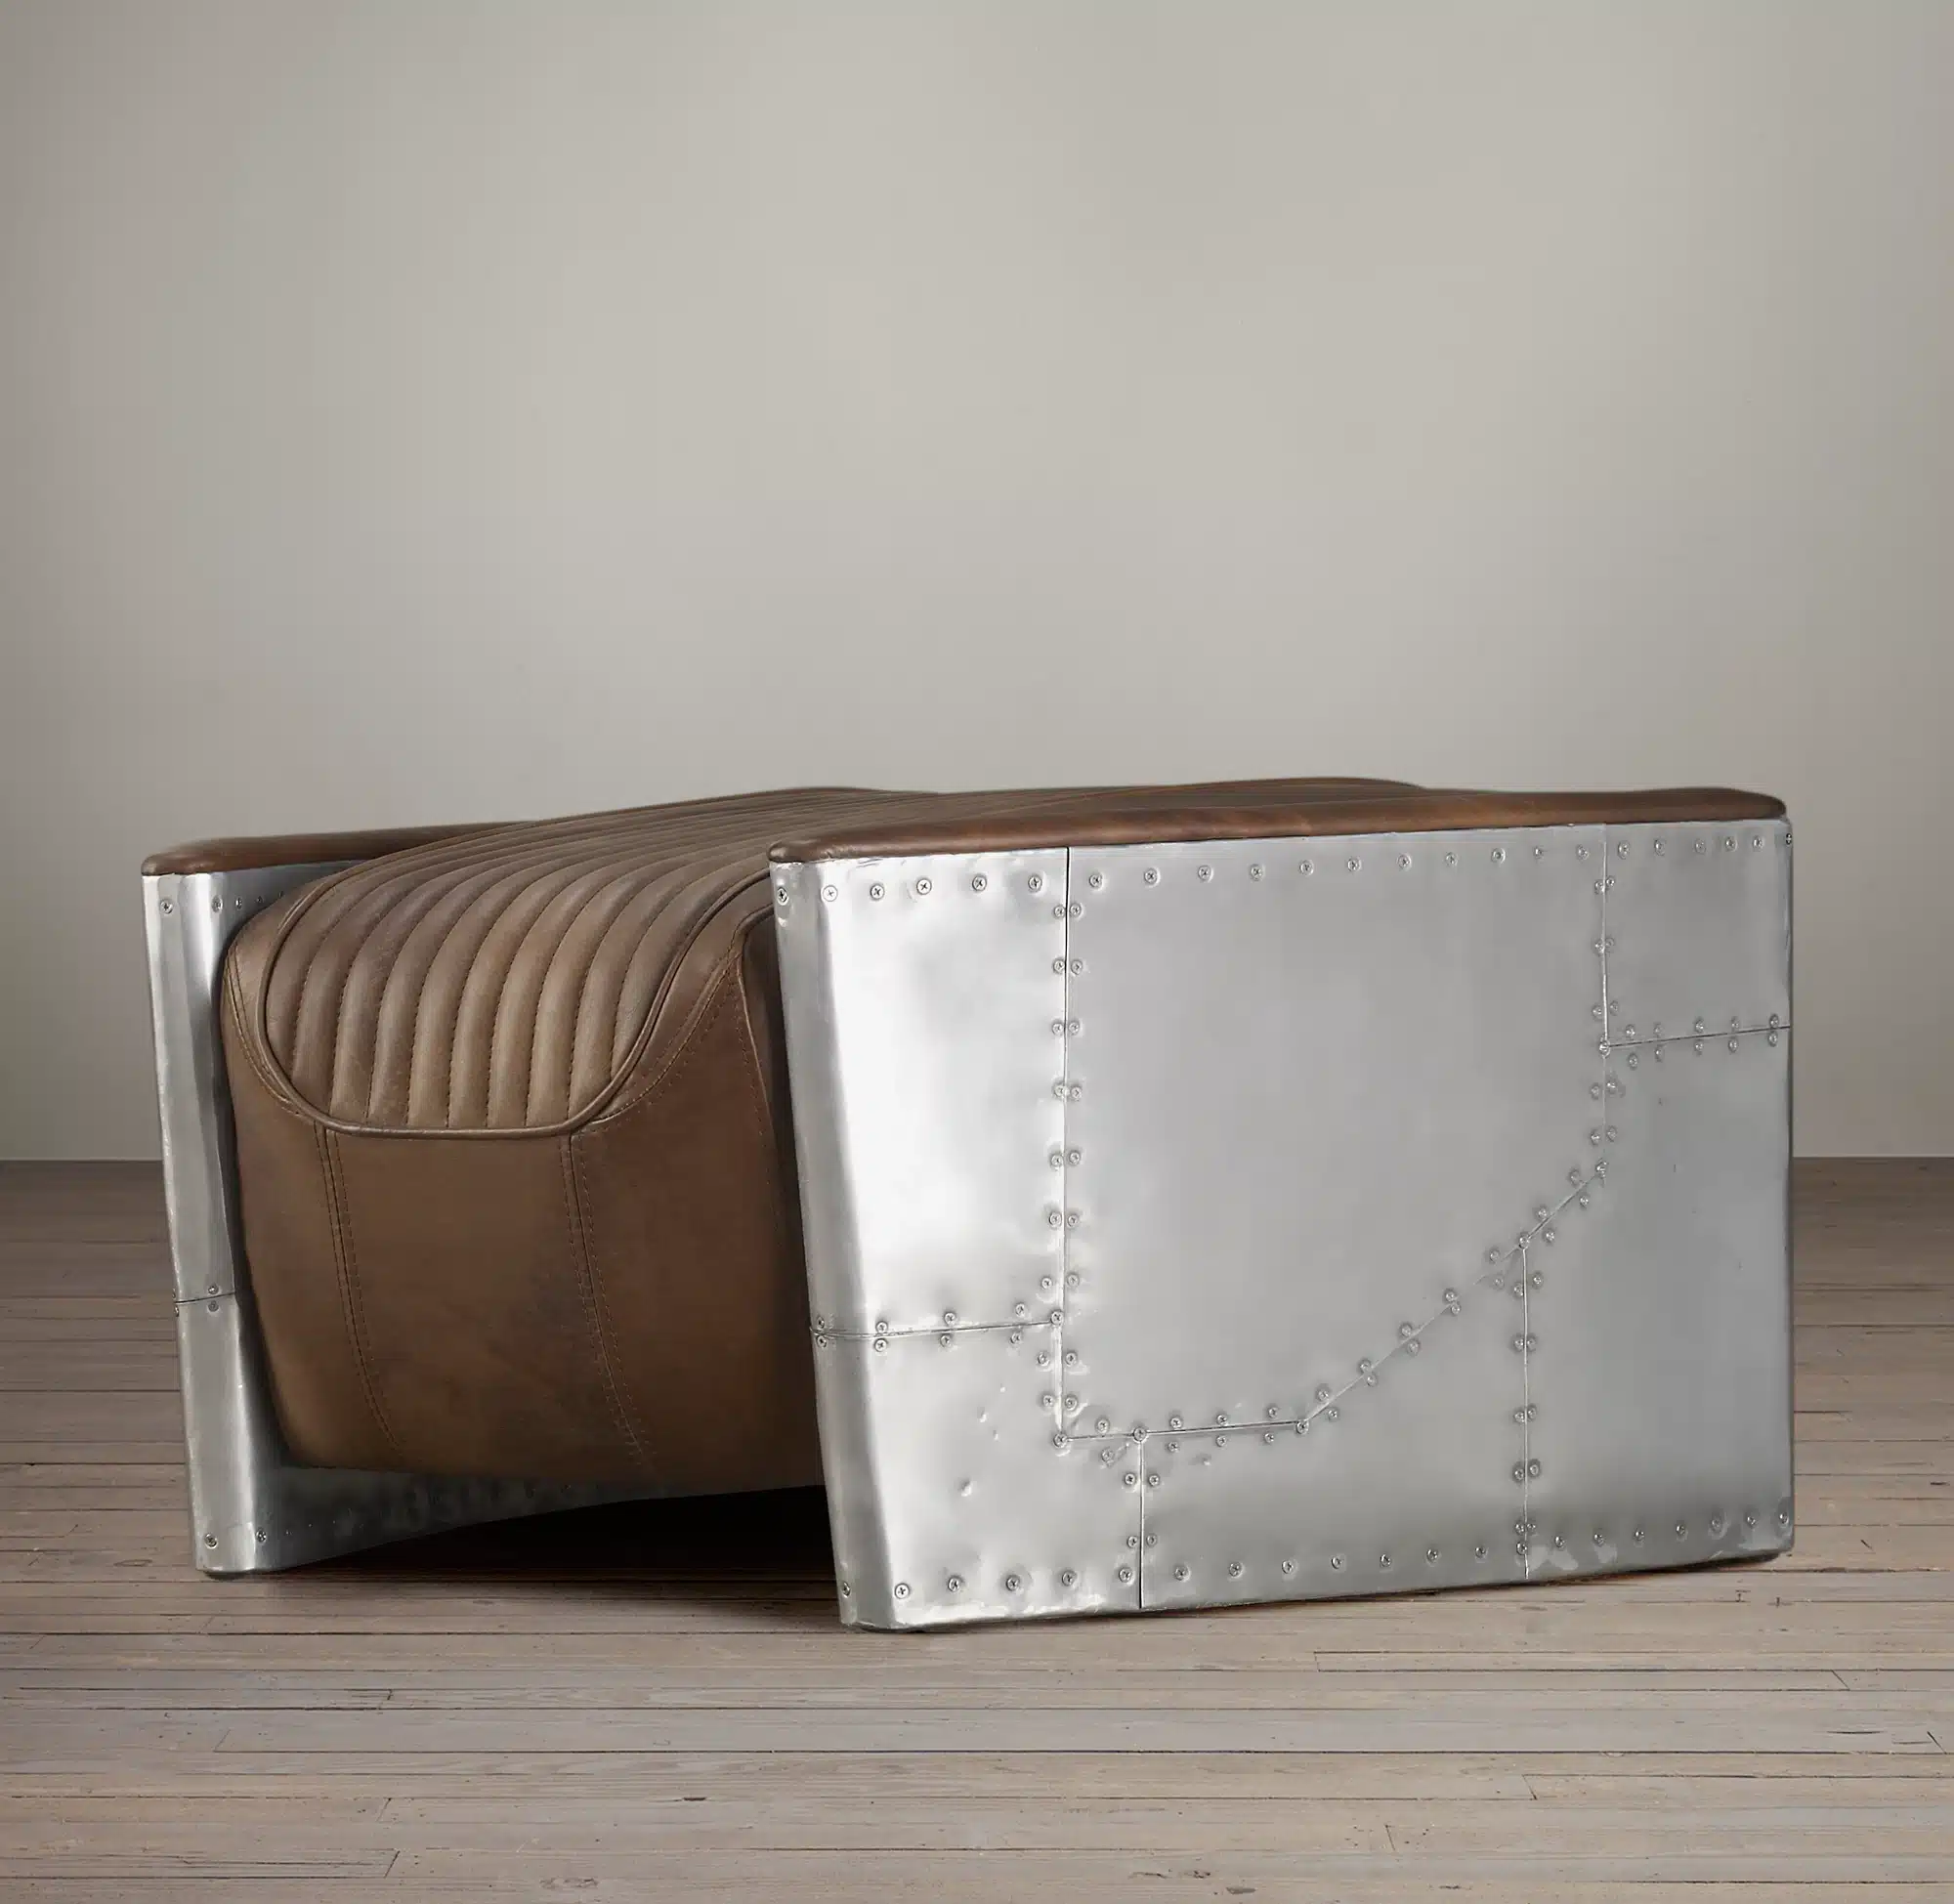 An awesome high quality Aviator leather pouf to complete your Aviator lounge chair.